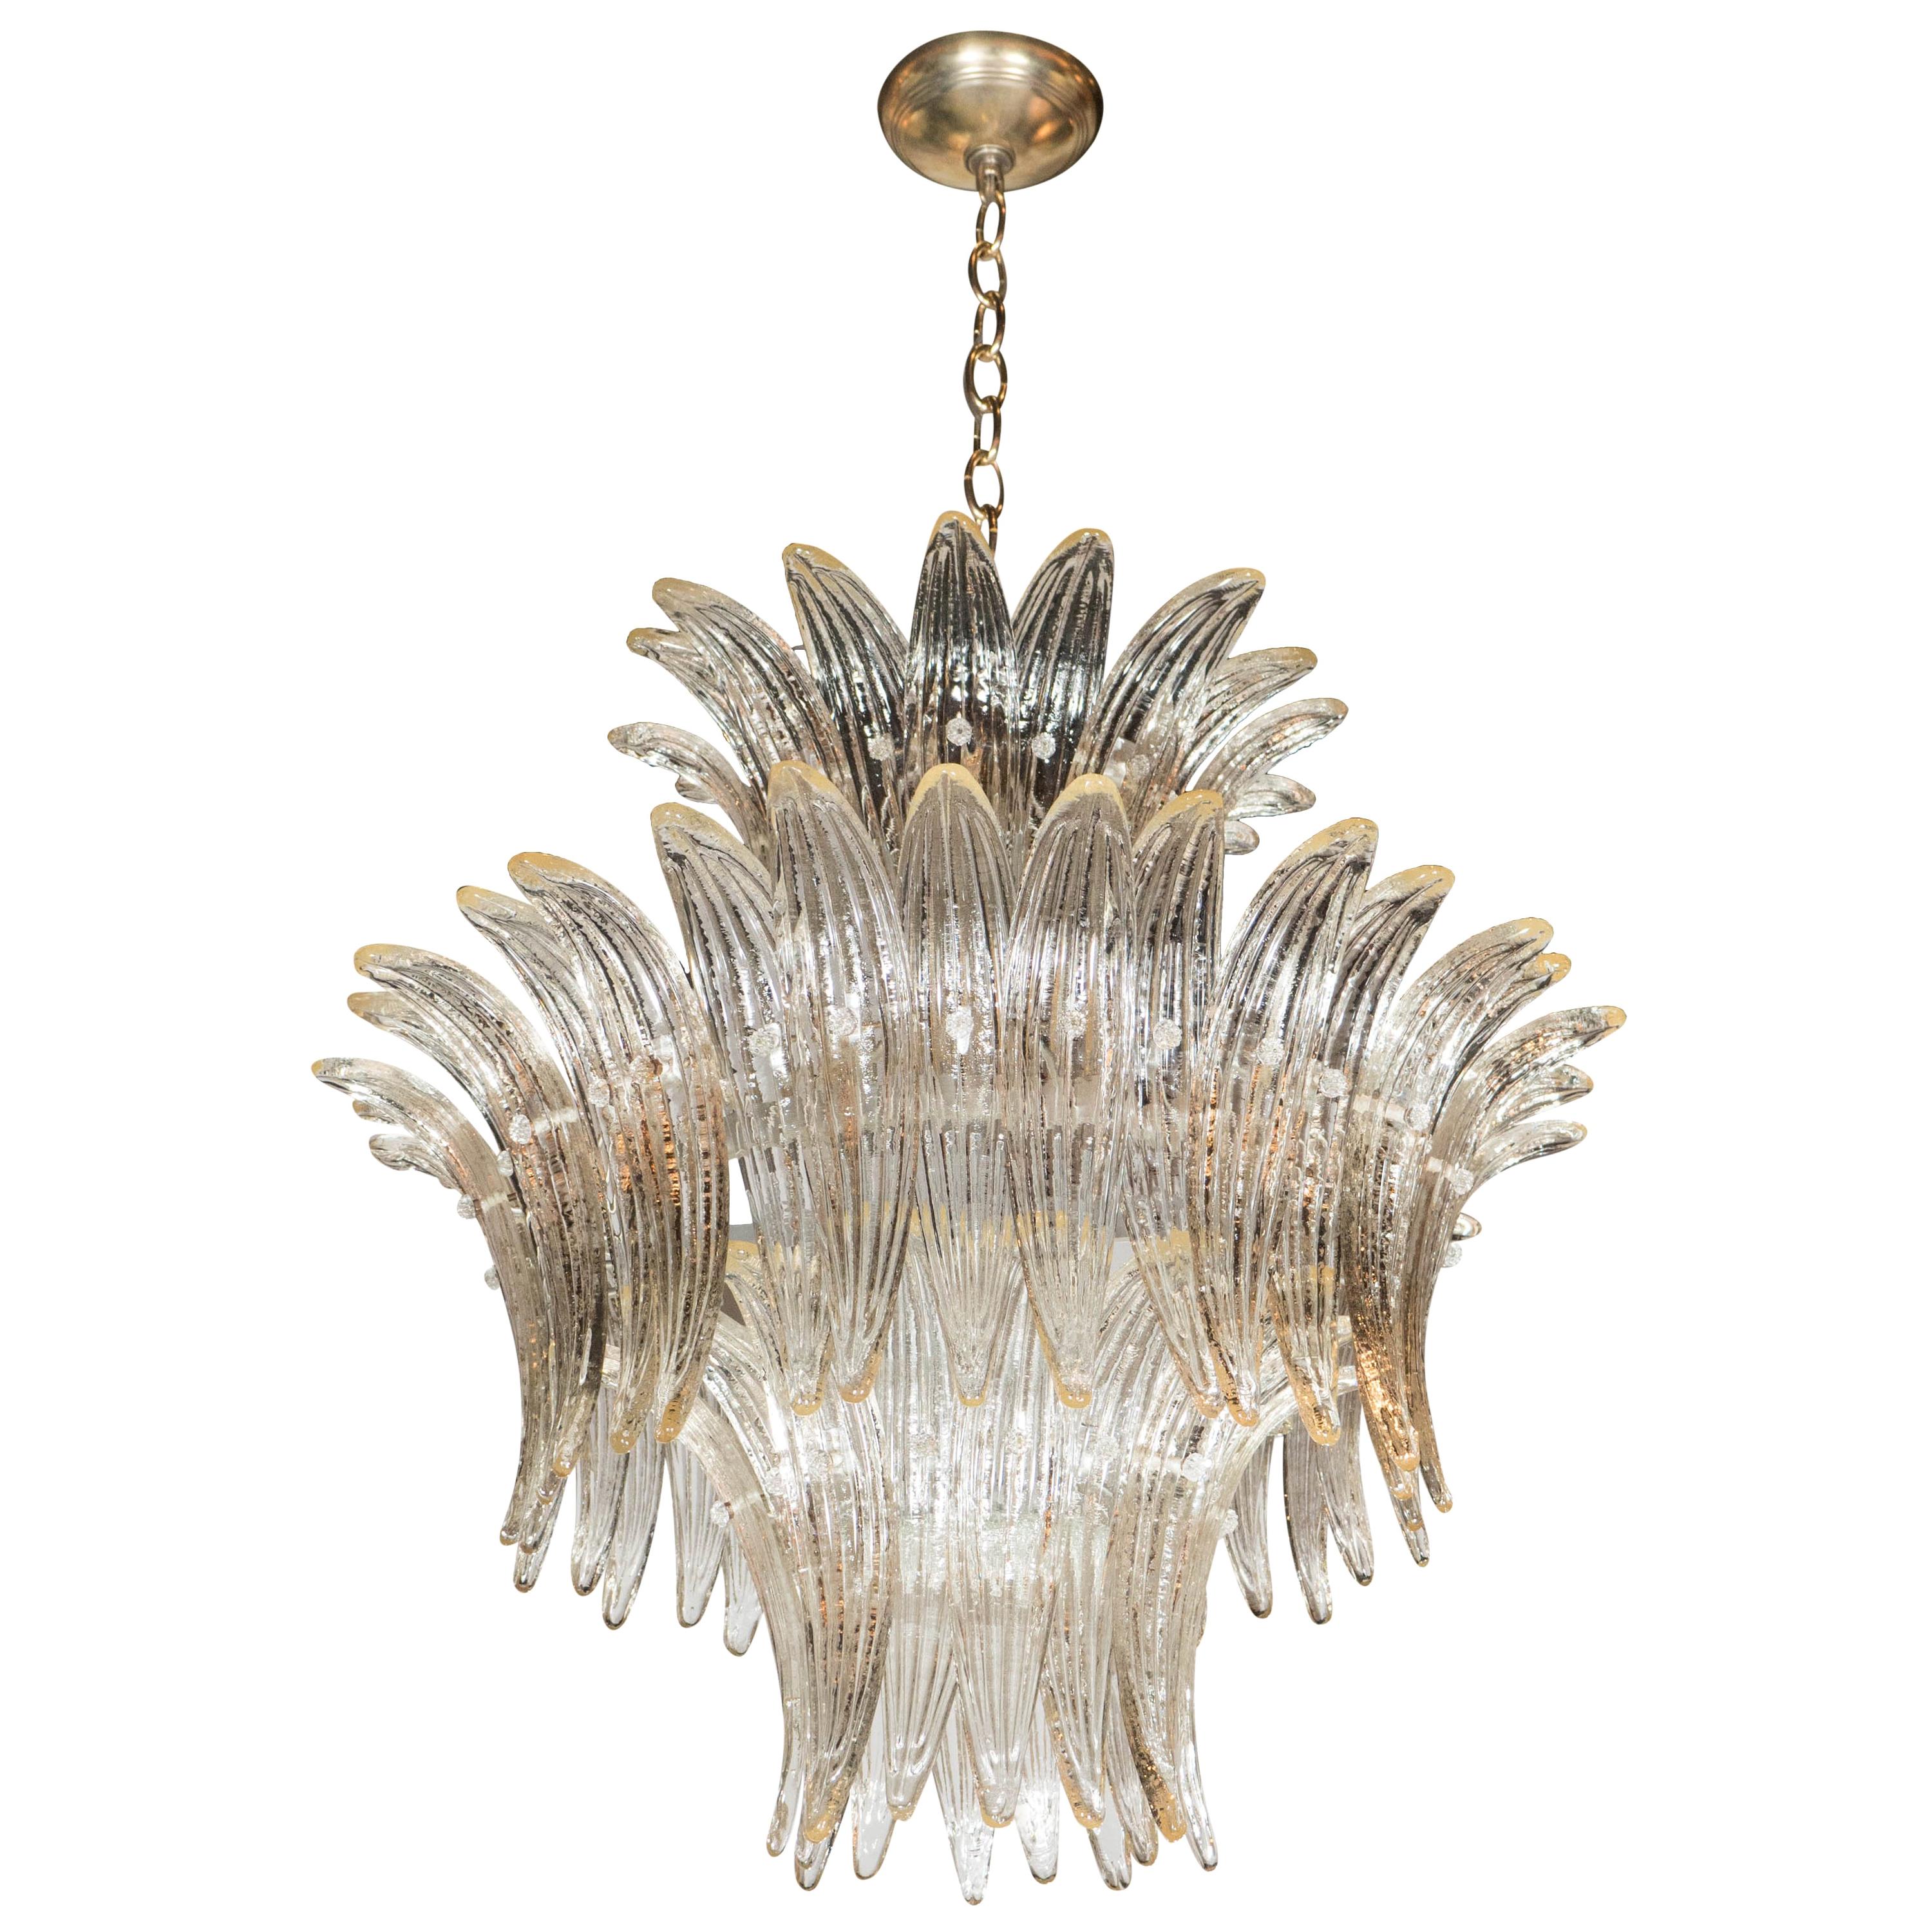 Modernist Three-Tier "Palma" Chandelier in Murano Glass and Brass Fittings